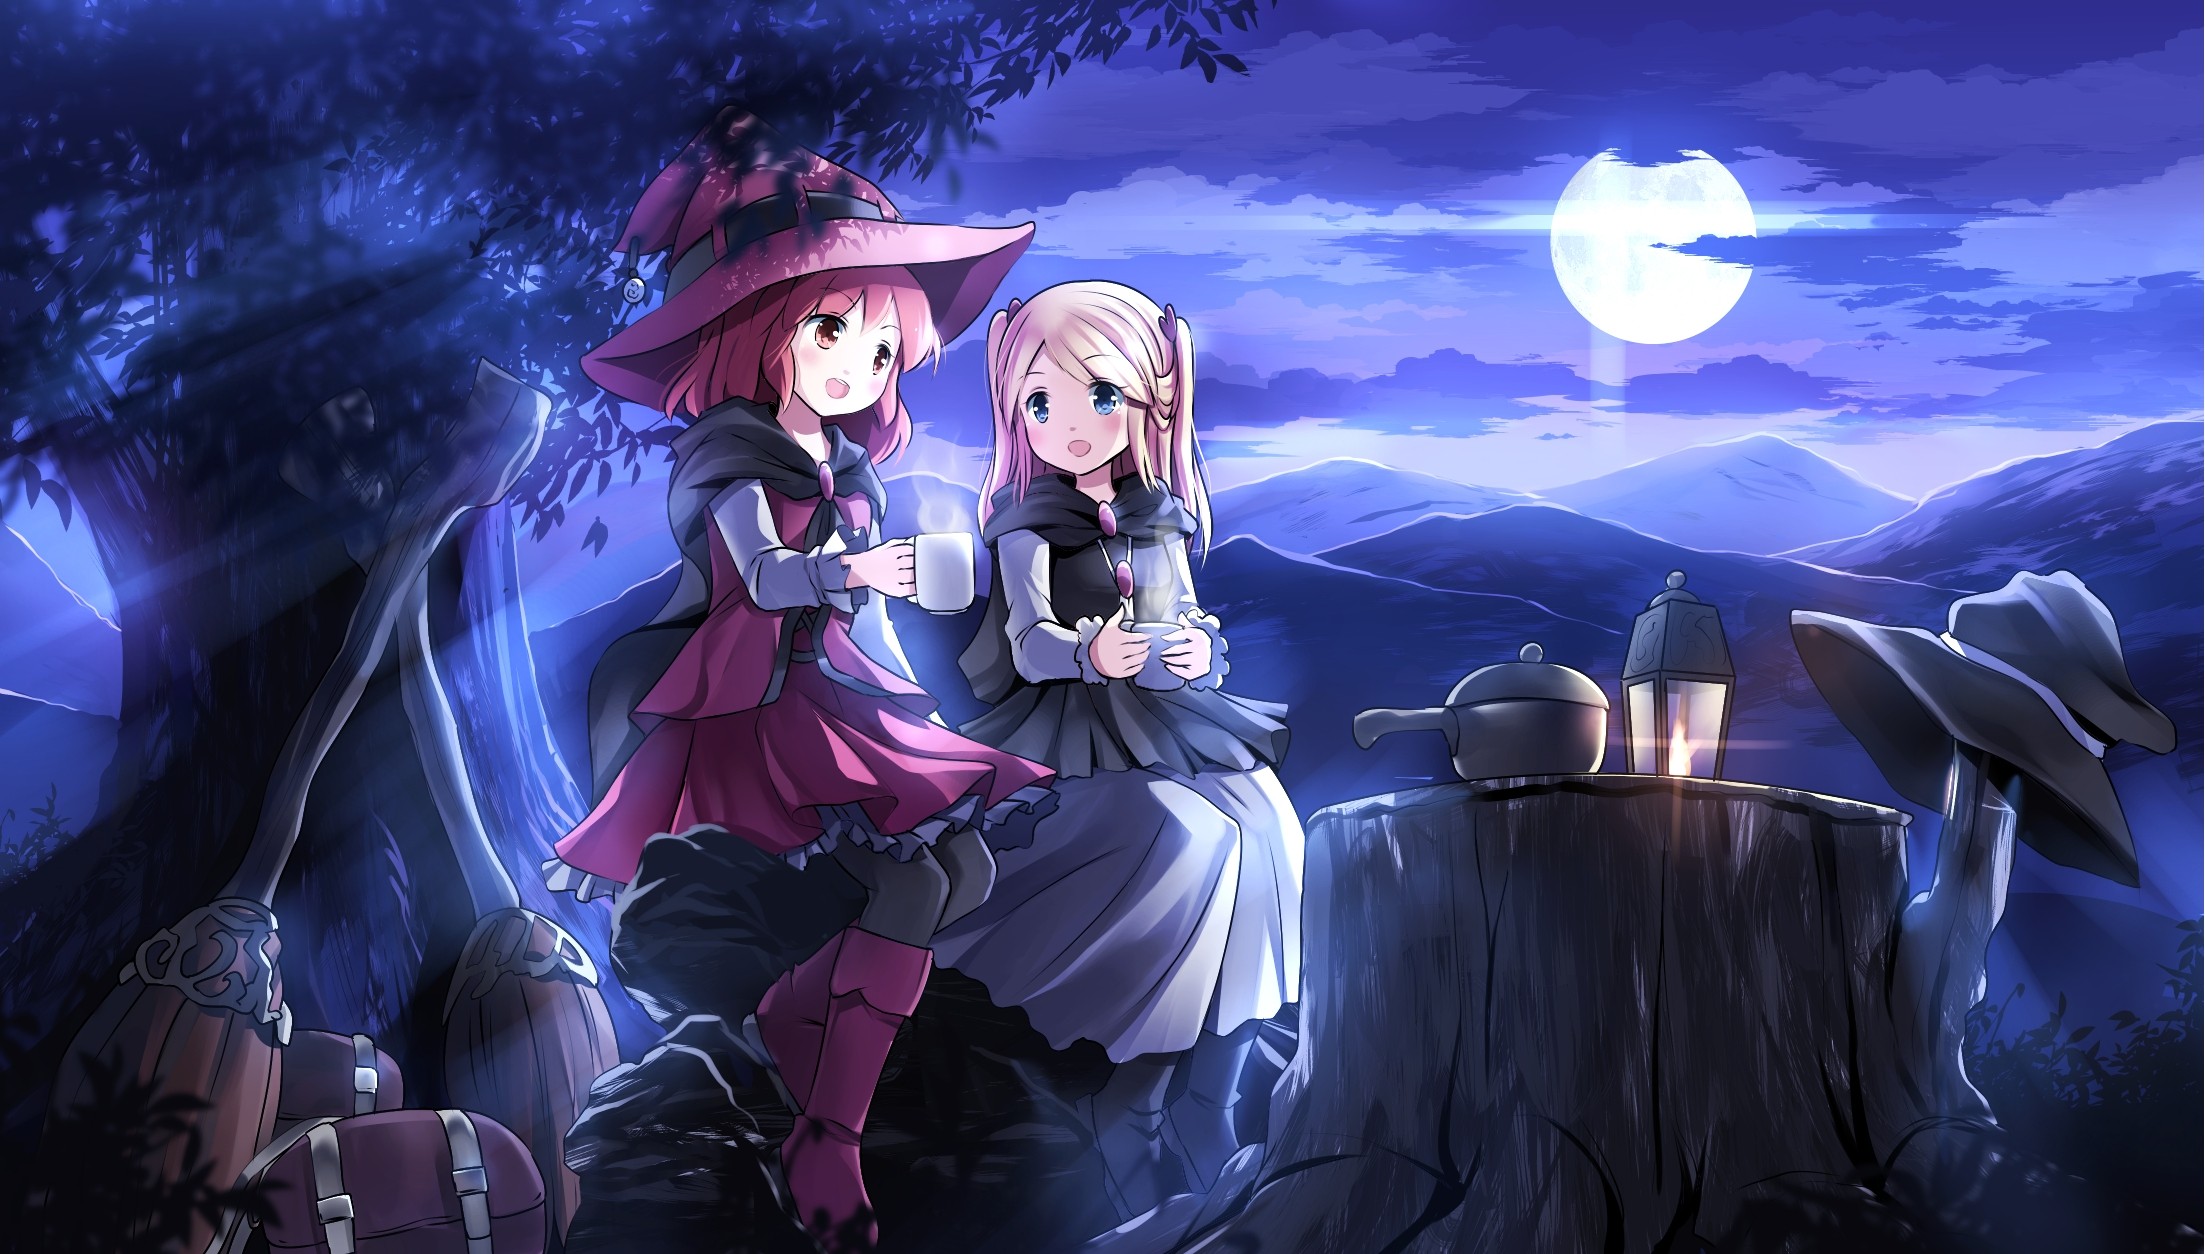 Anime 2205x1254 anime anime girls original characters magician blonde long hair short hair pink hair Moon night open mouth smiling sky clouds hat two women Pixiv fantasy art fantasy girl